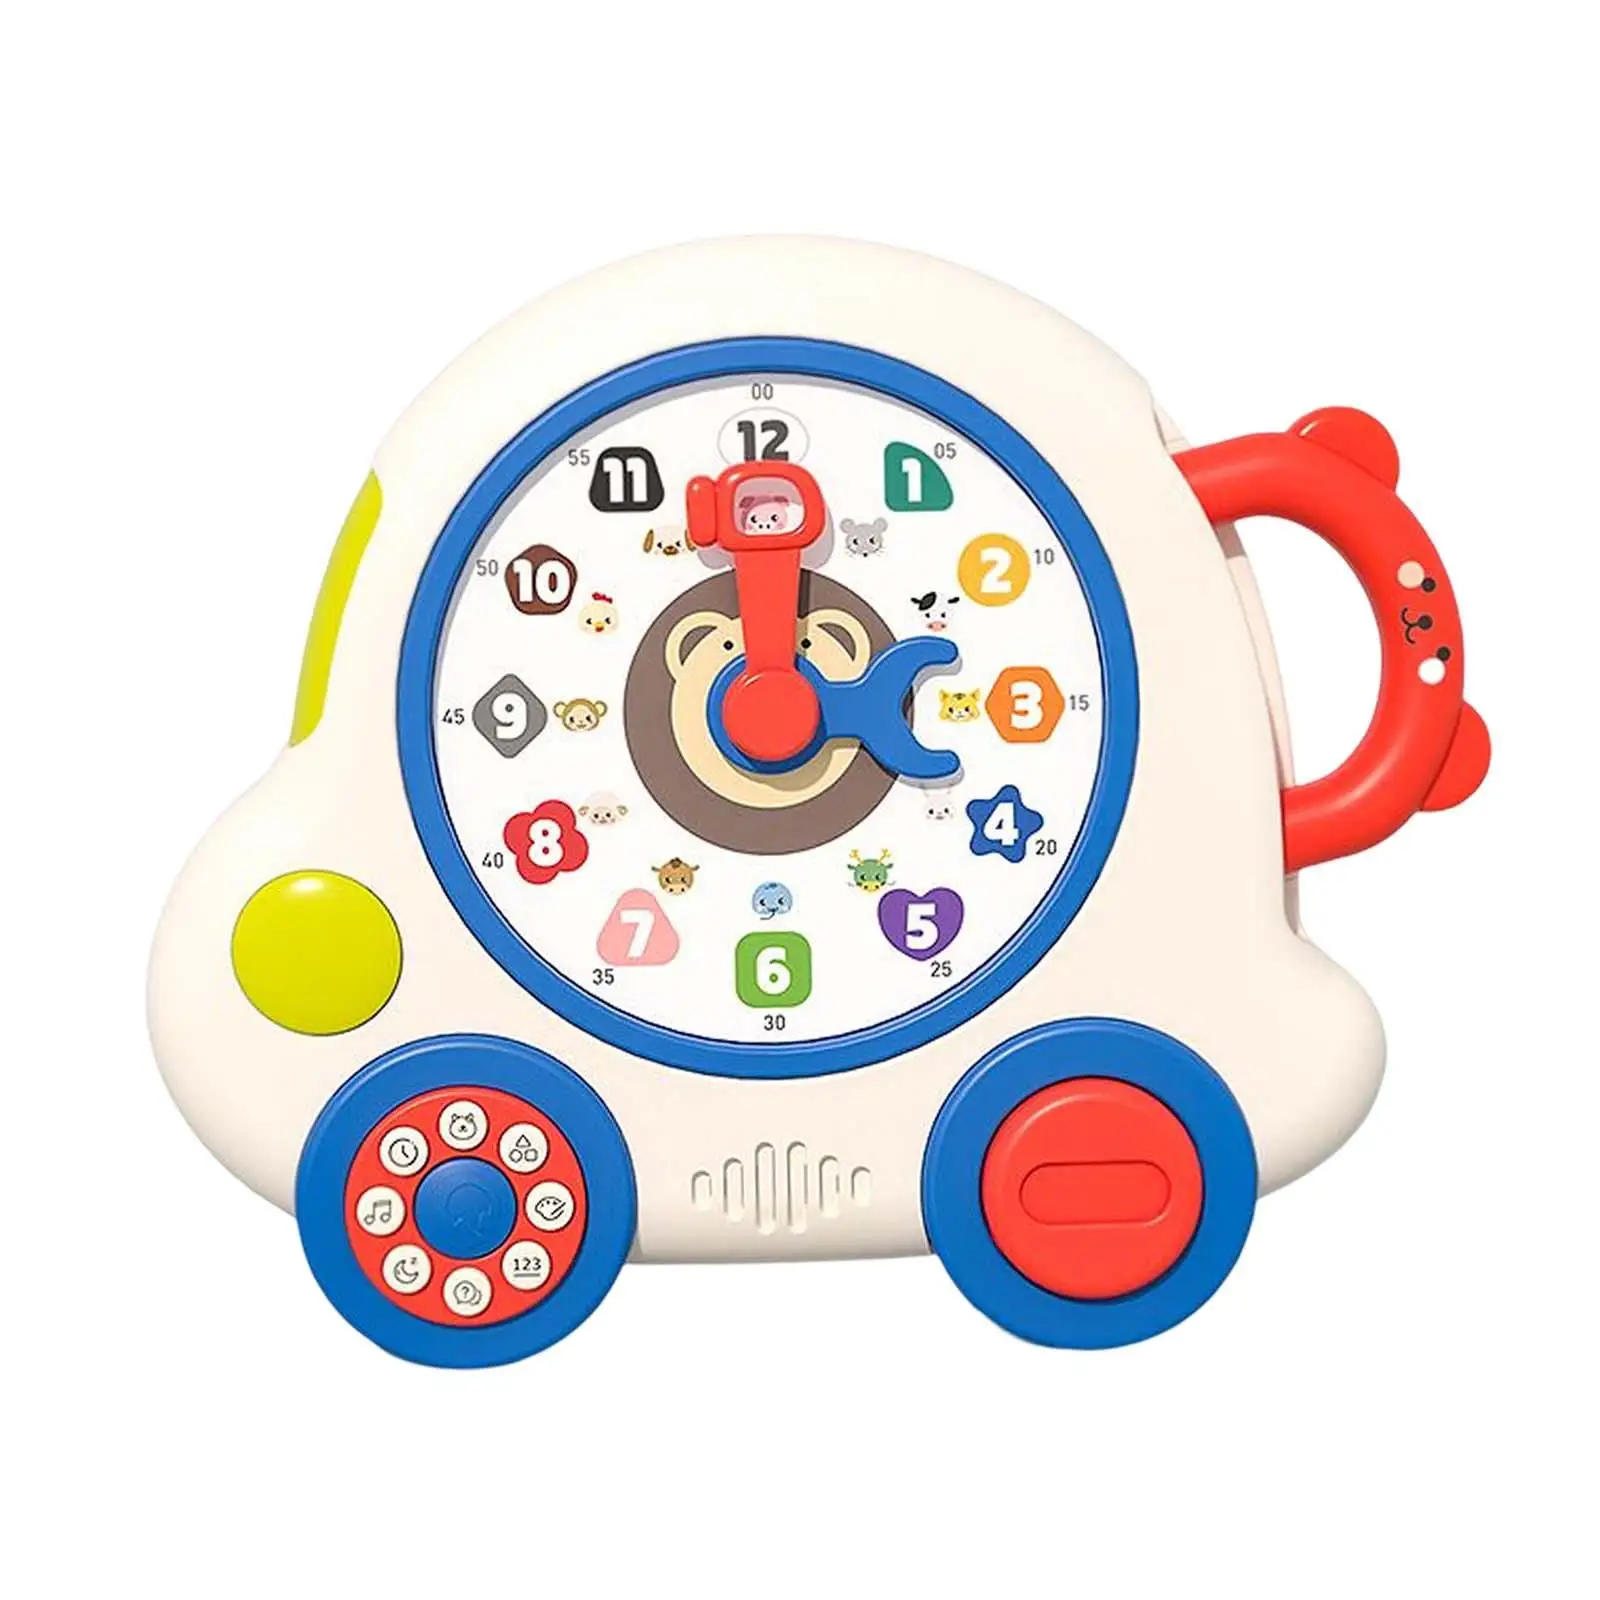 Kids Clock Learning Machine Portable Multiple Modes Enlightenment Educational Electronic Interactive Learning Toy for Boys Girls